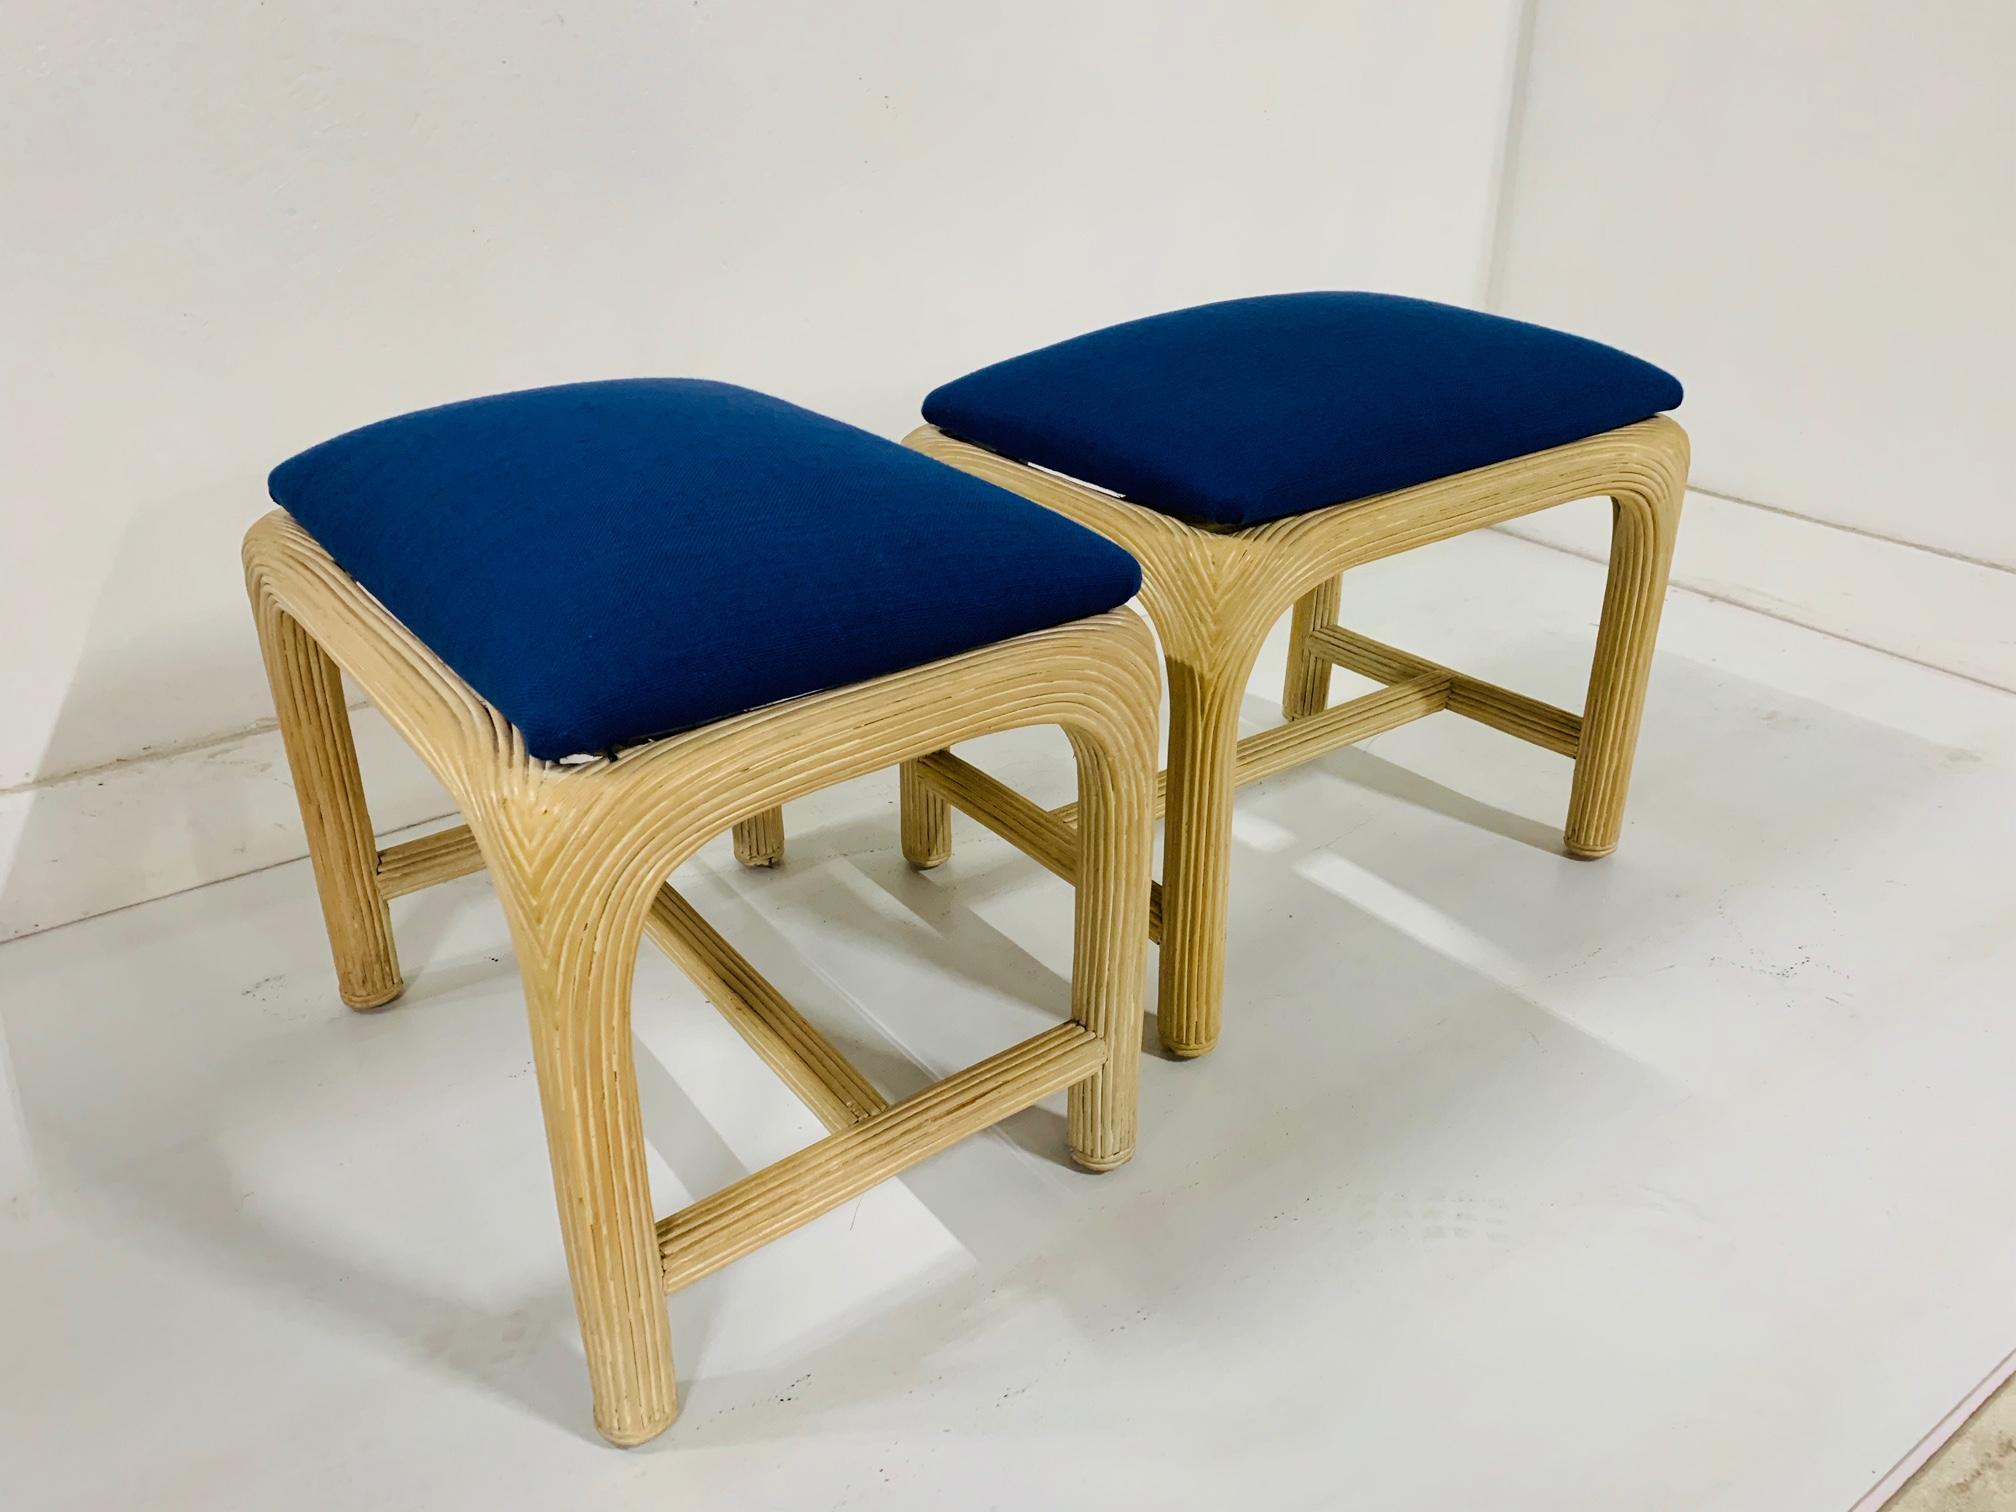 Pair of Hollywood Regency, reed upholstered benches with blue upholstered seats.